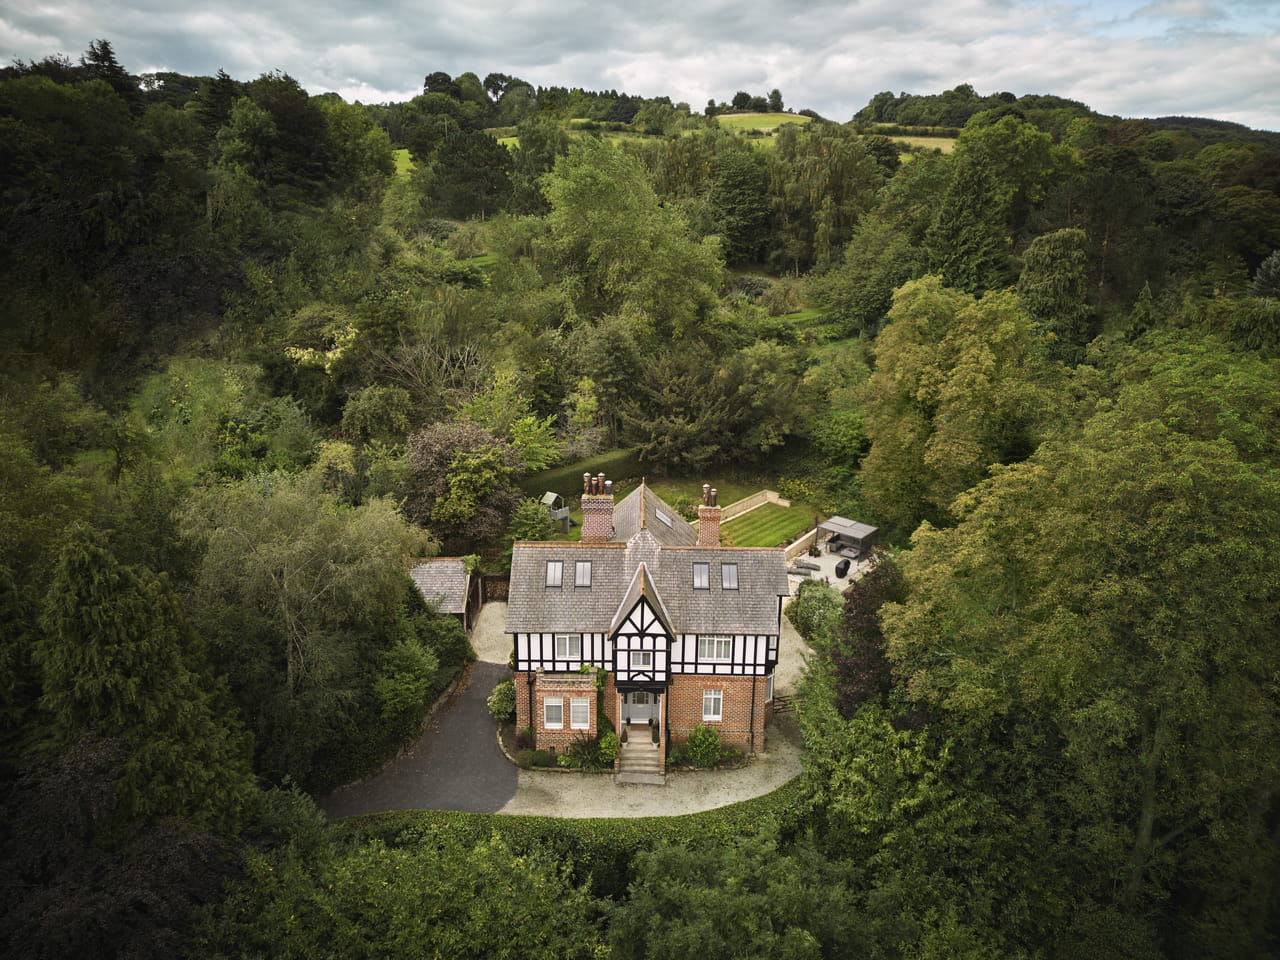 Aerial view of a traditional countryside house surrounded by dense woodland.